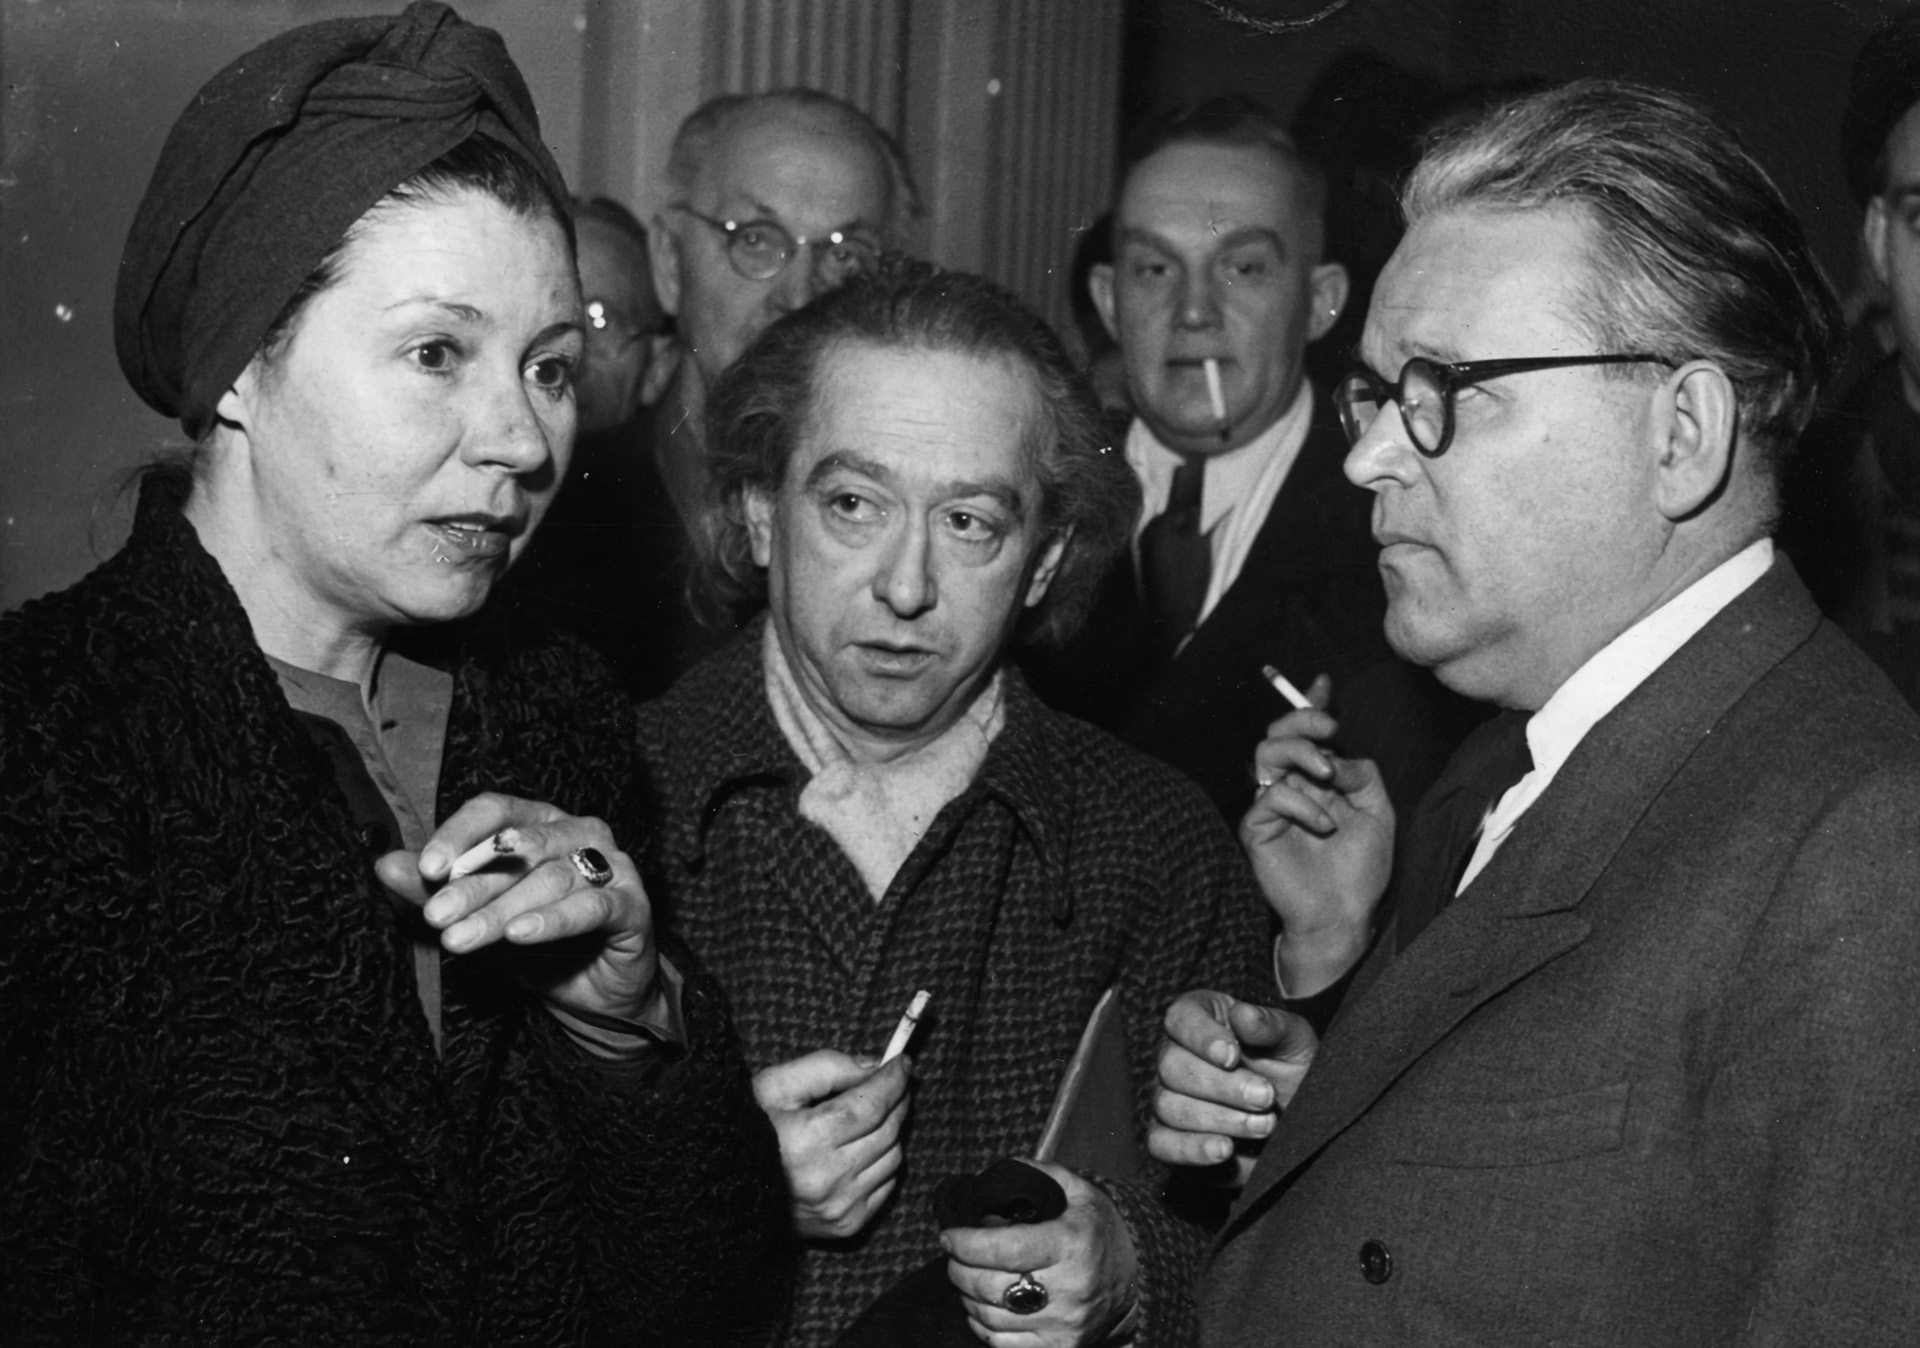 During a break in his postwar trial, director Veit Harlan (right) converses with the widow of actor Ferdinand Marian, who played the title role in the film. Jud Suss was later banned in many countries.